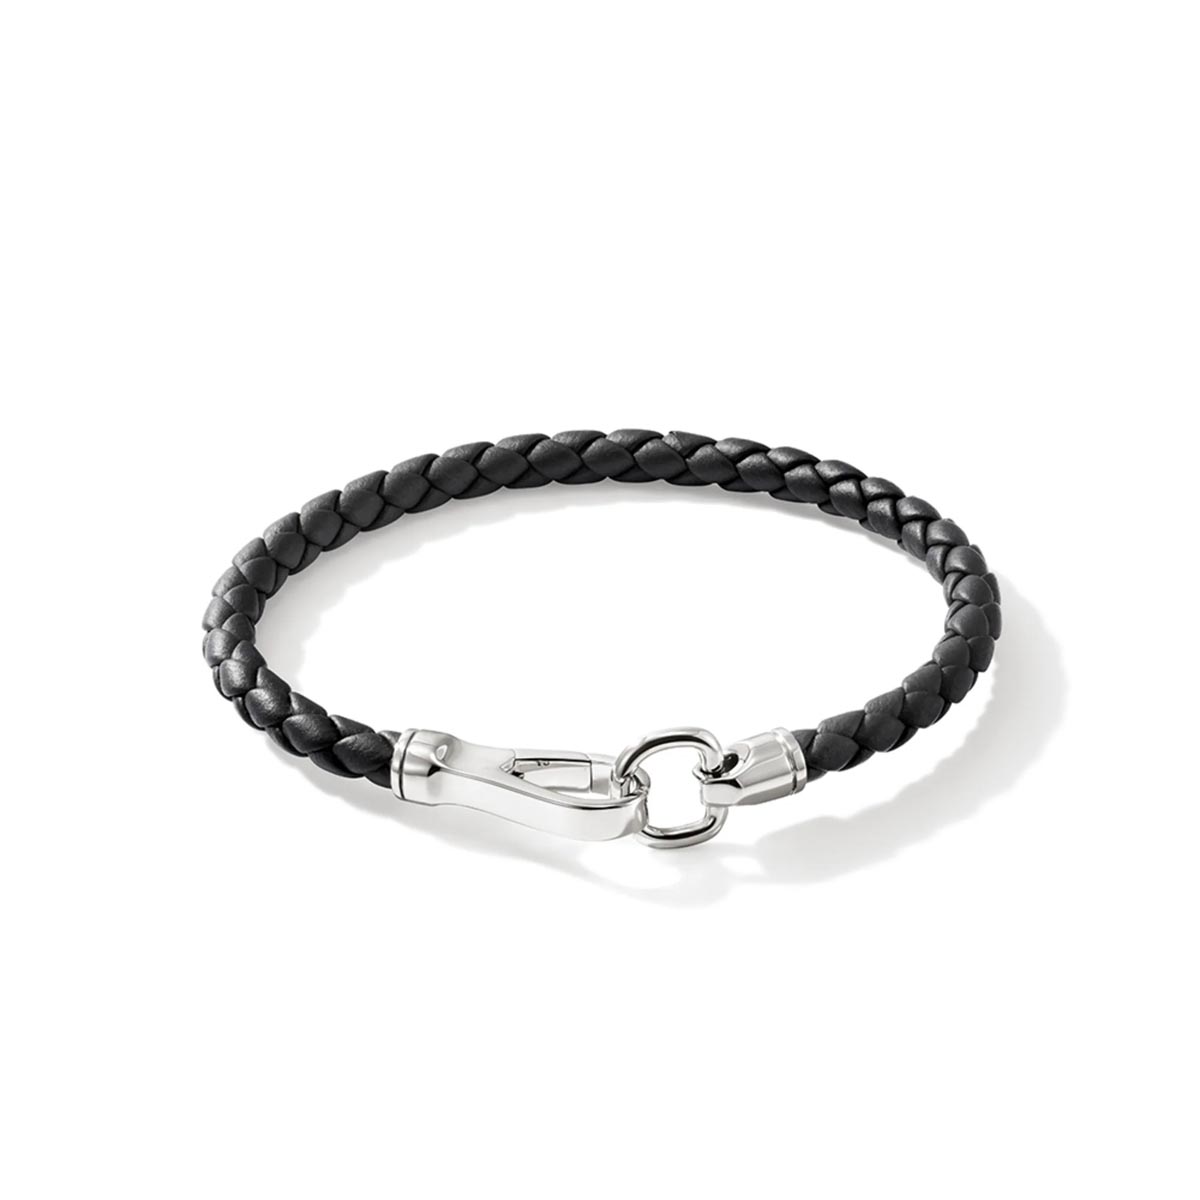 John Hardy Mens Hook Clasp Bracelet in Sterling Silver and Black Leather Cord